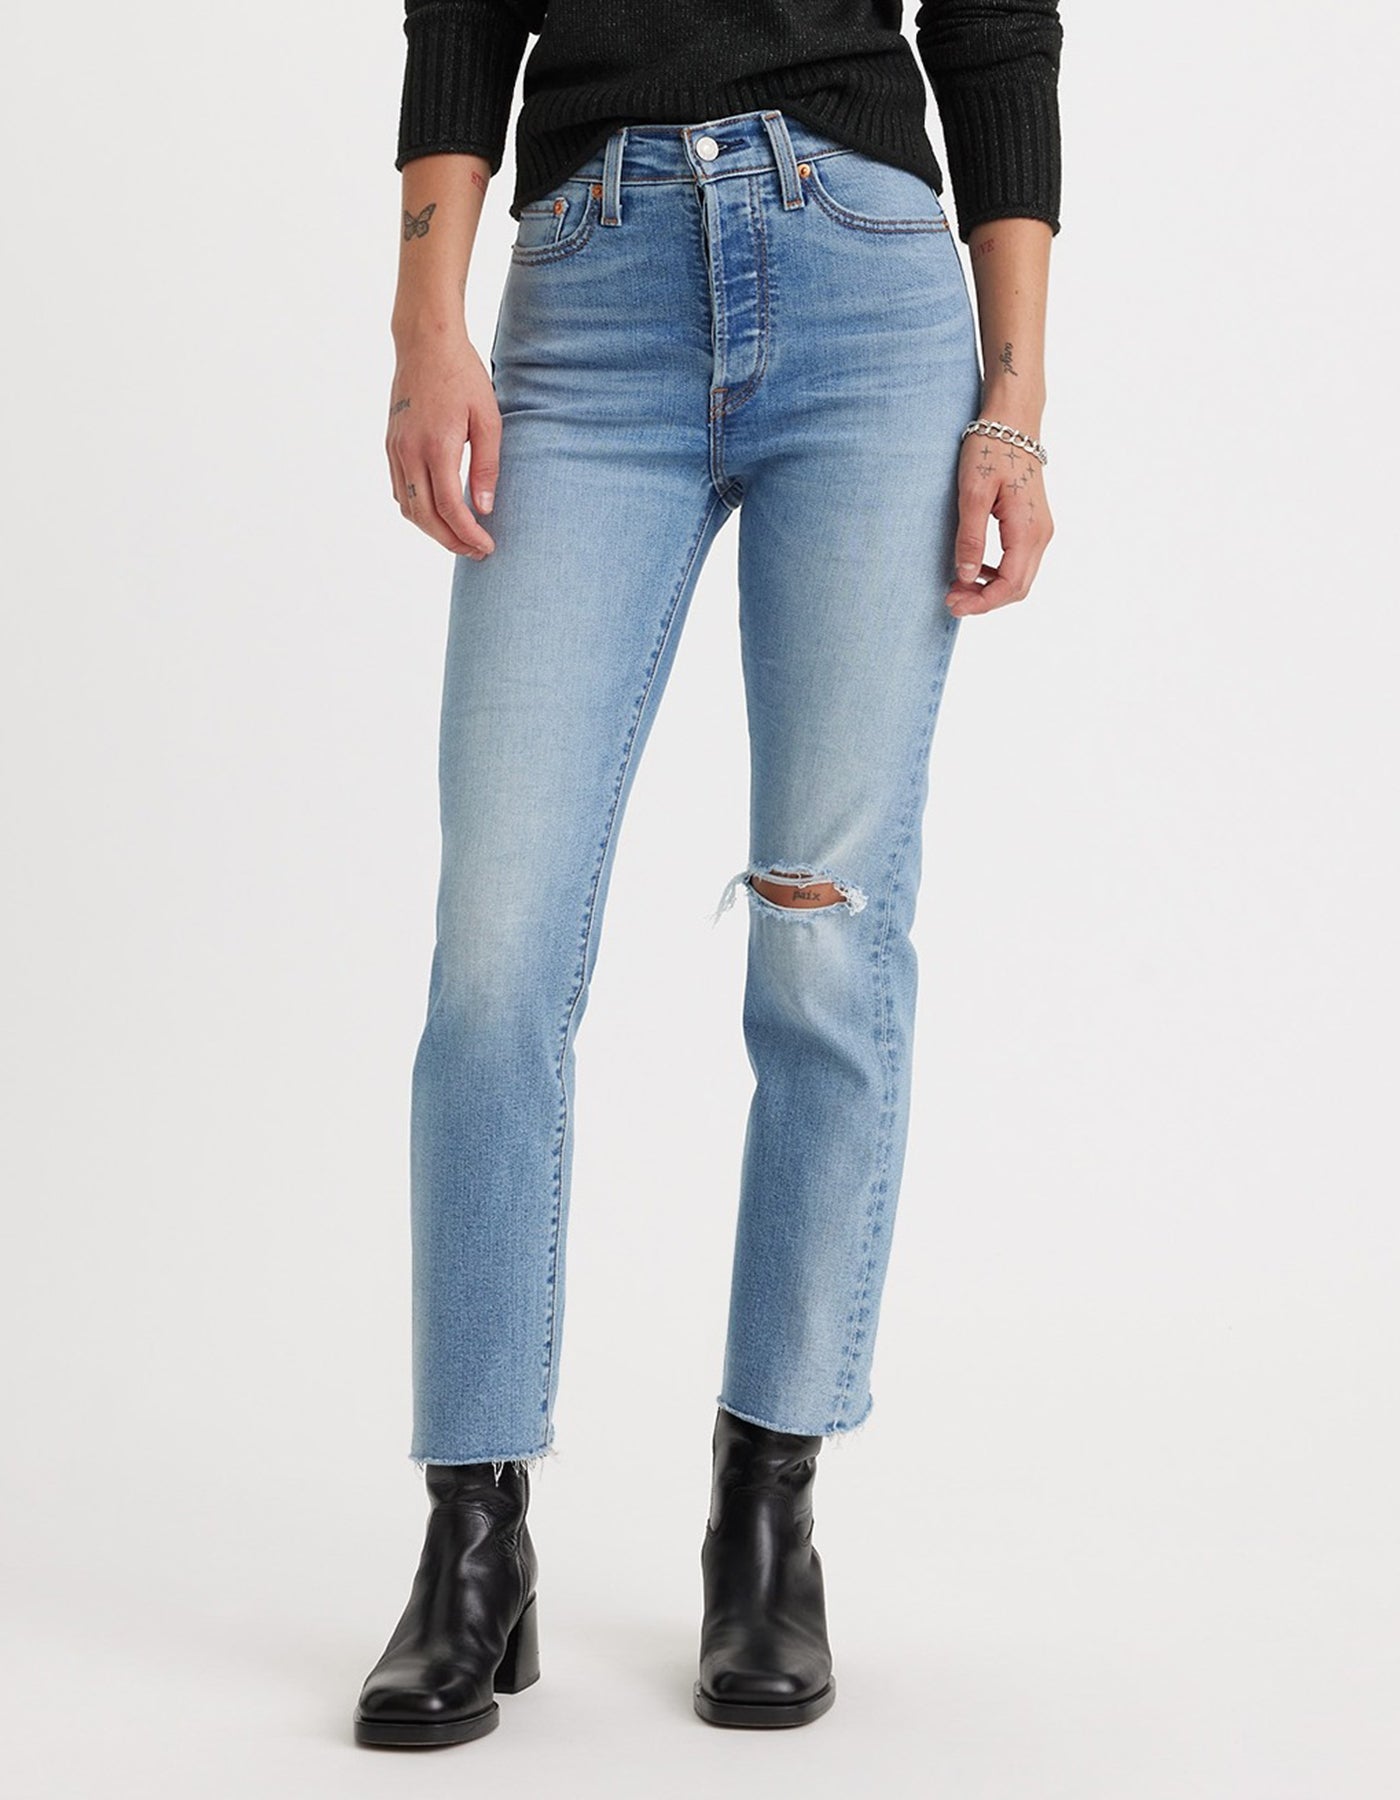 5 WAYS TO WEAR LEVI'S WEDGIE JEANS FOR SPRING